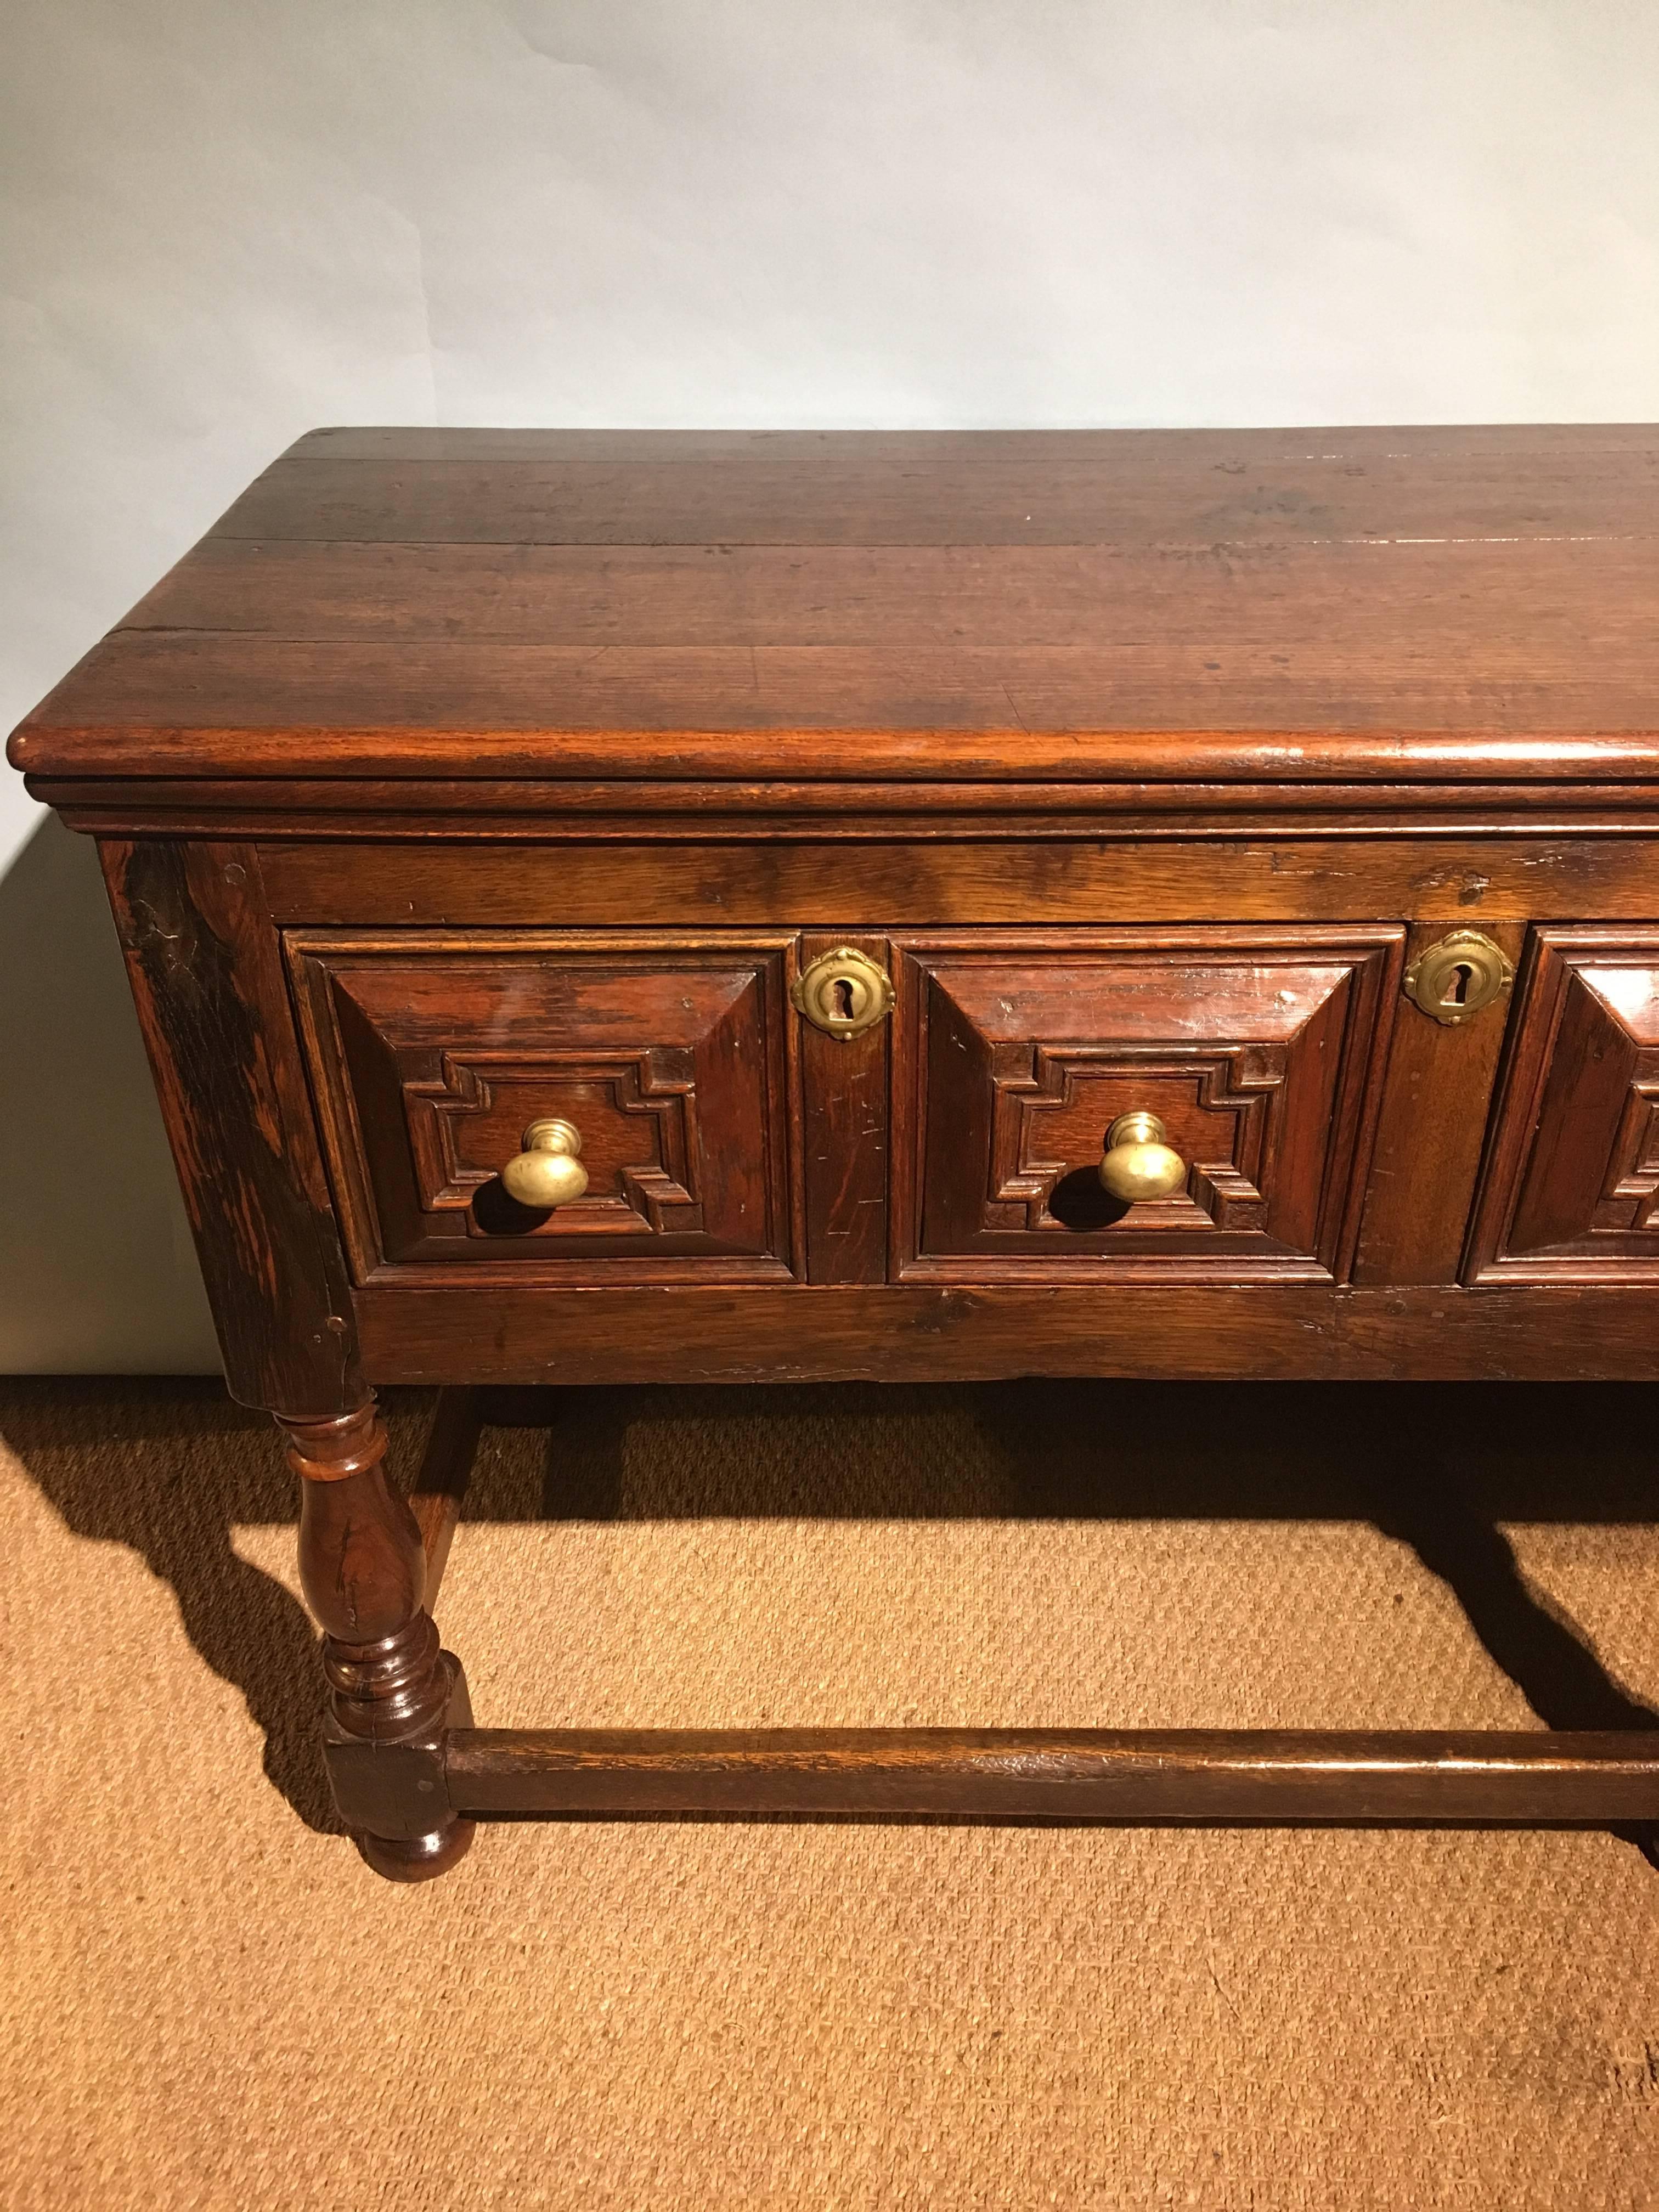 Good quality late 19th century oak dresser base 

English dating to circa 1890s having three large drawers and brass fittings. 

This piece has been through our workshops cleaned polished and has a lovely color / patina.

Measures: Height 31